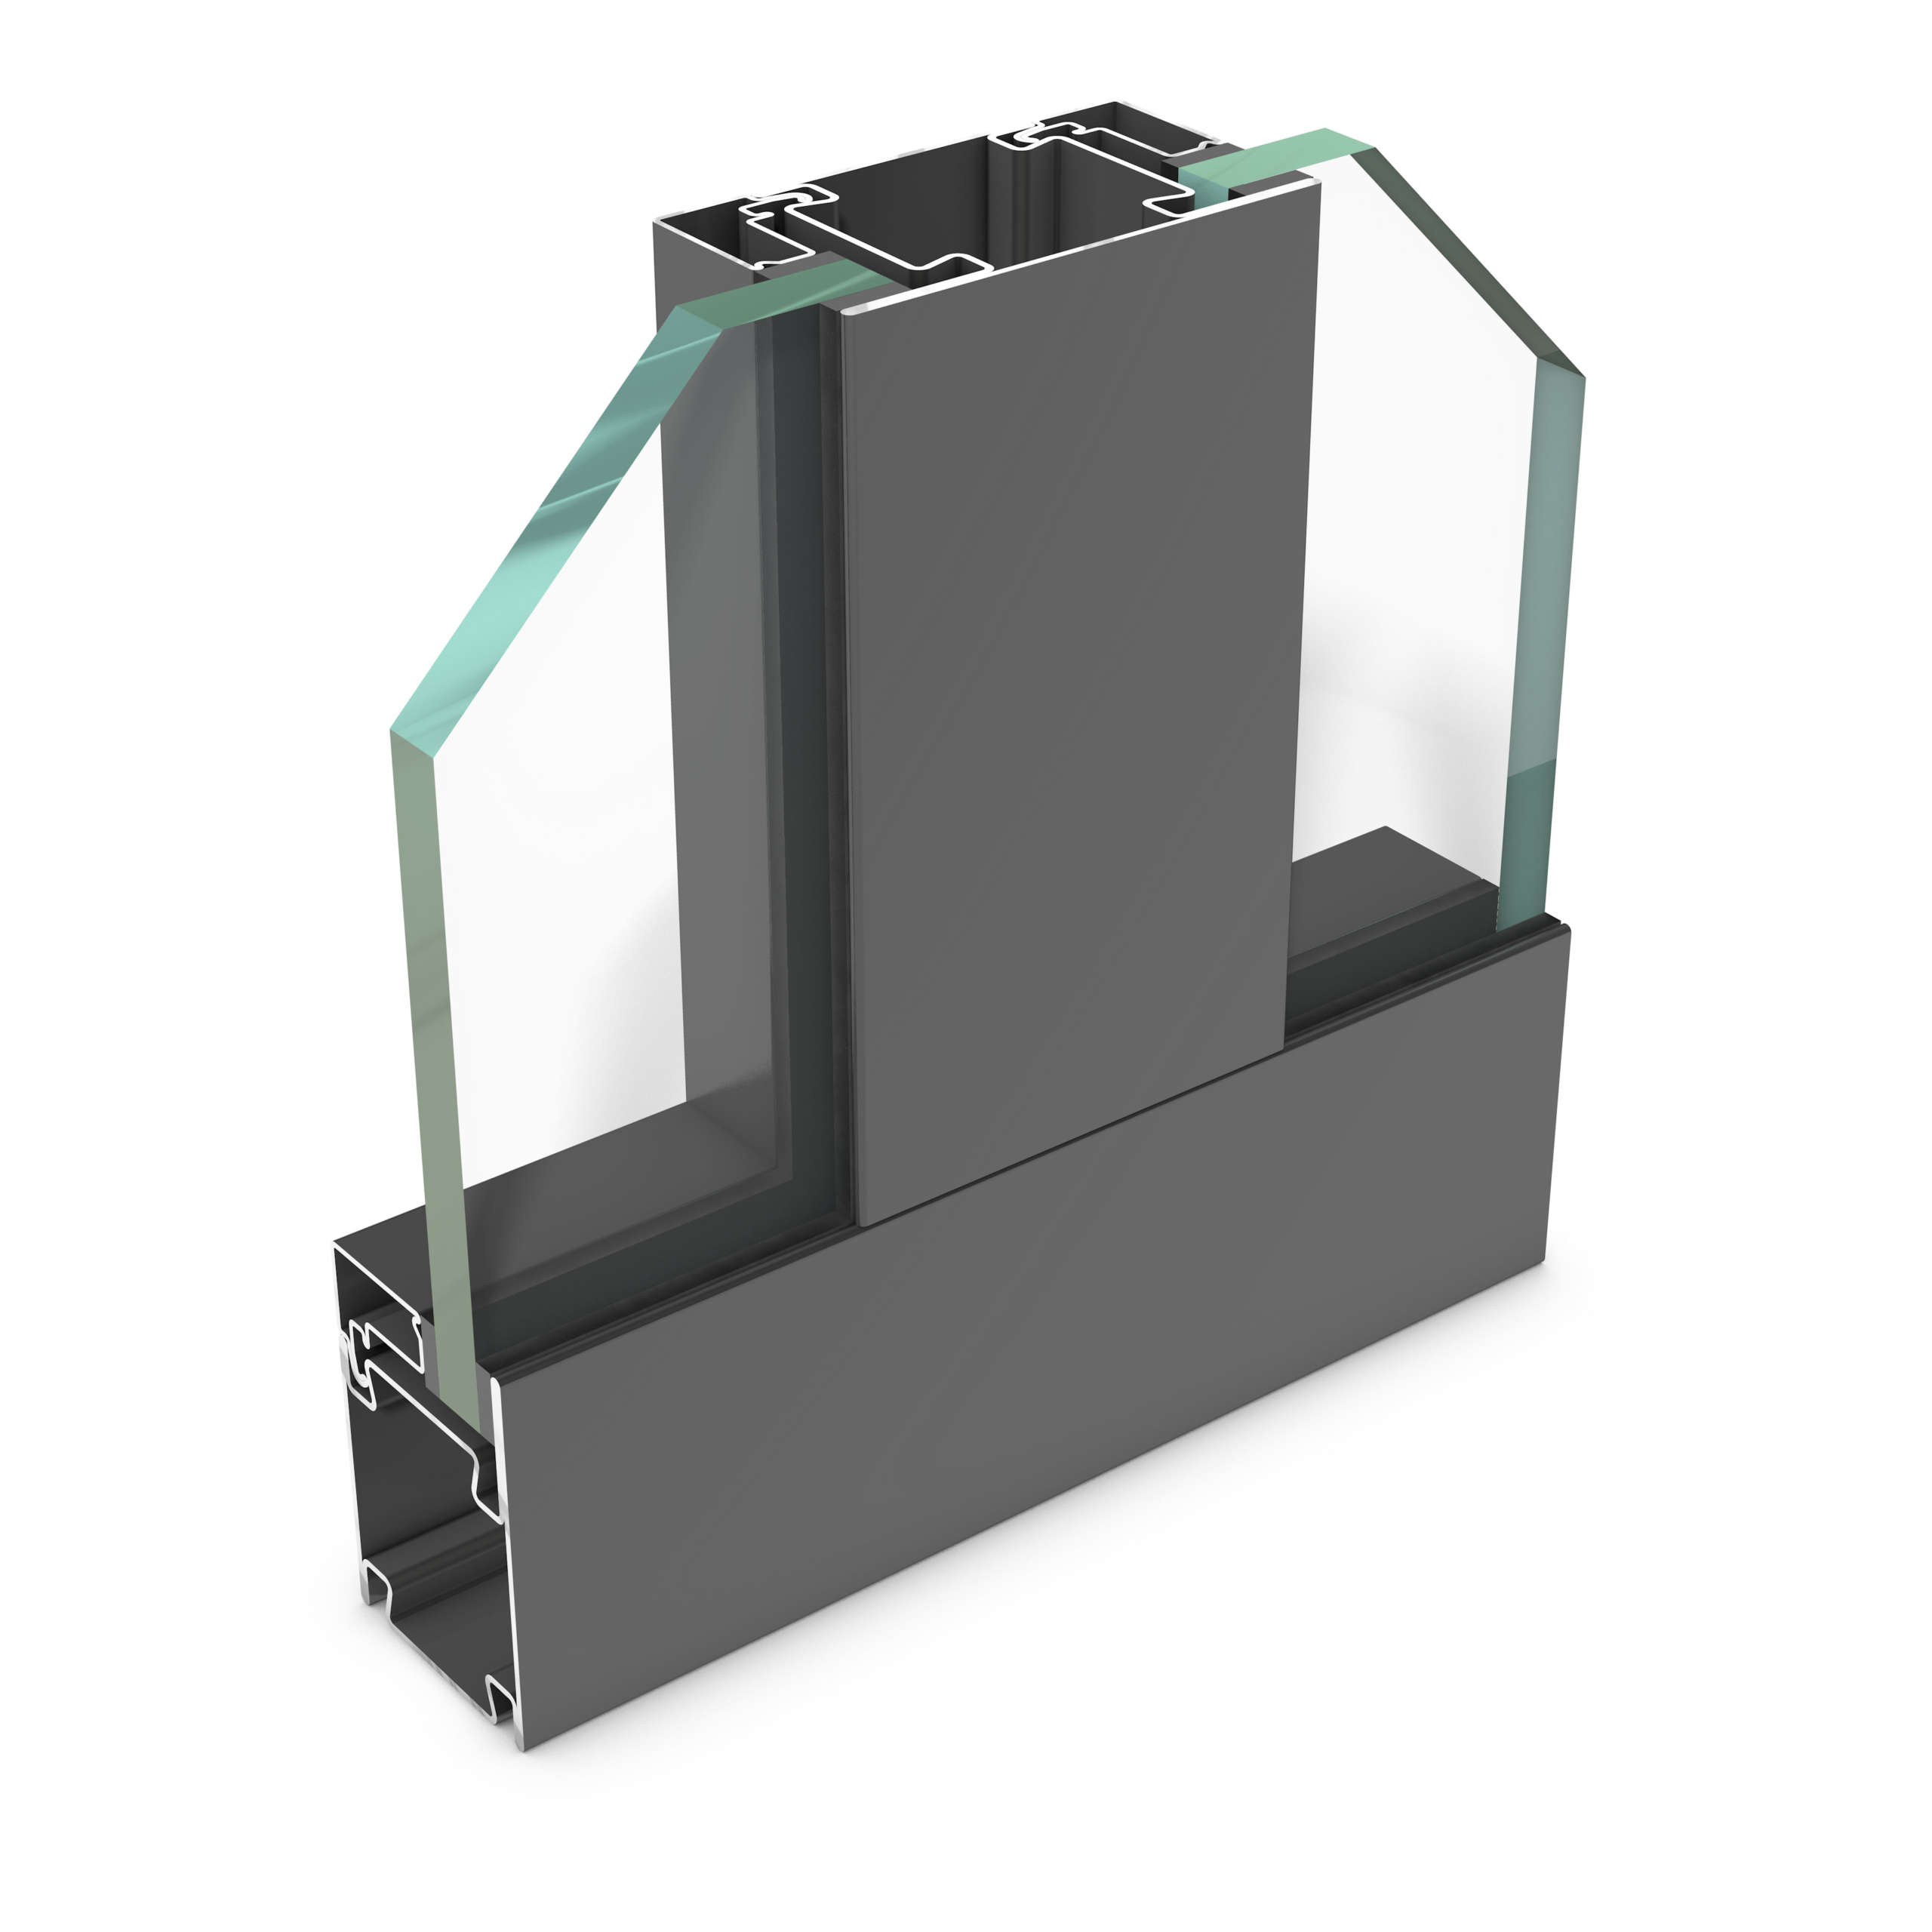 rp hermetic 55FP-90 – steel profile system for fire protection partition walls meeting E90/EW90 requirements